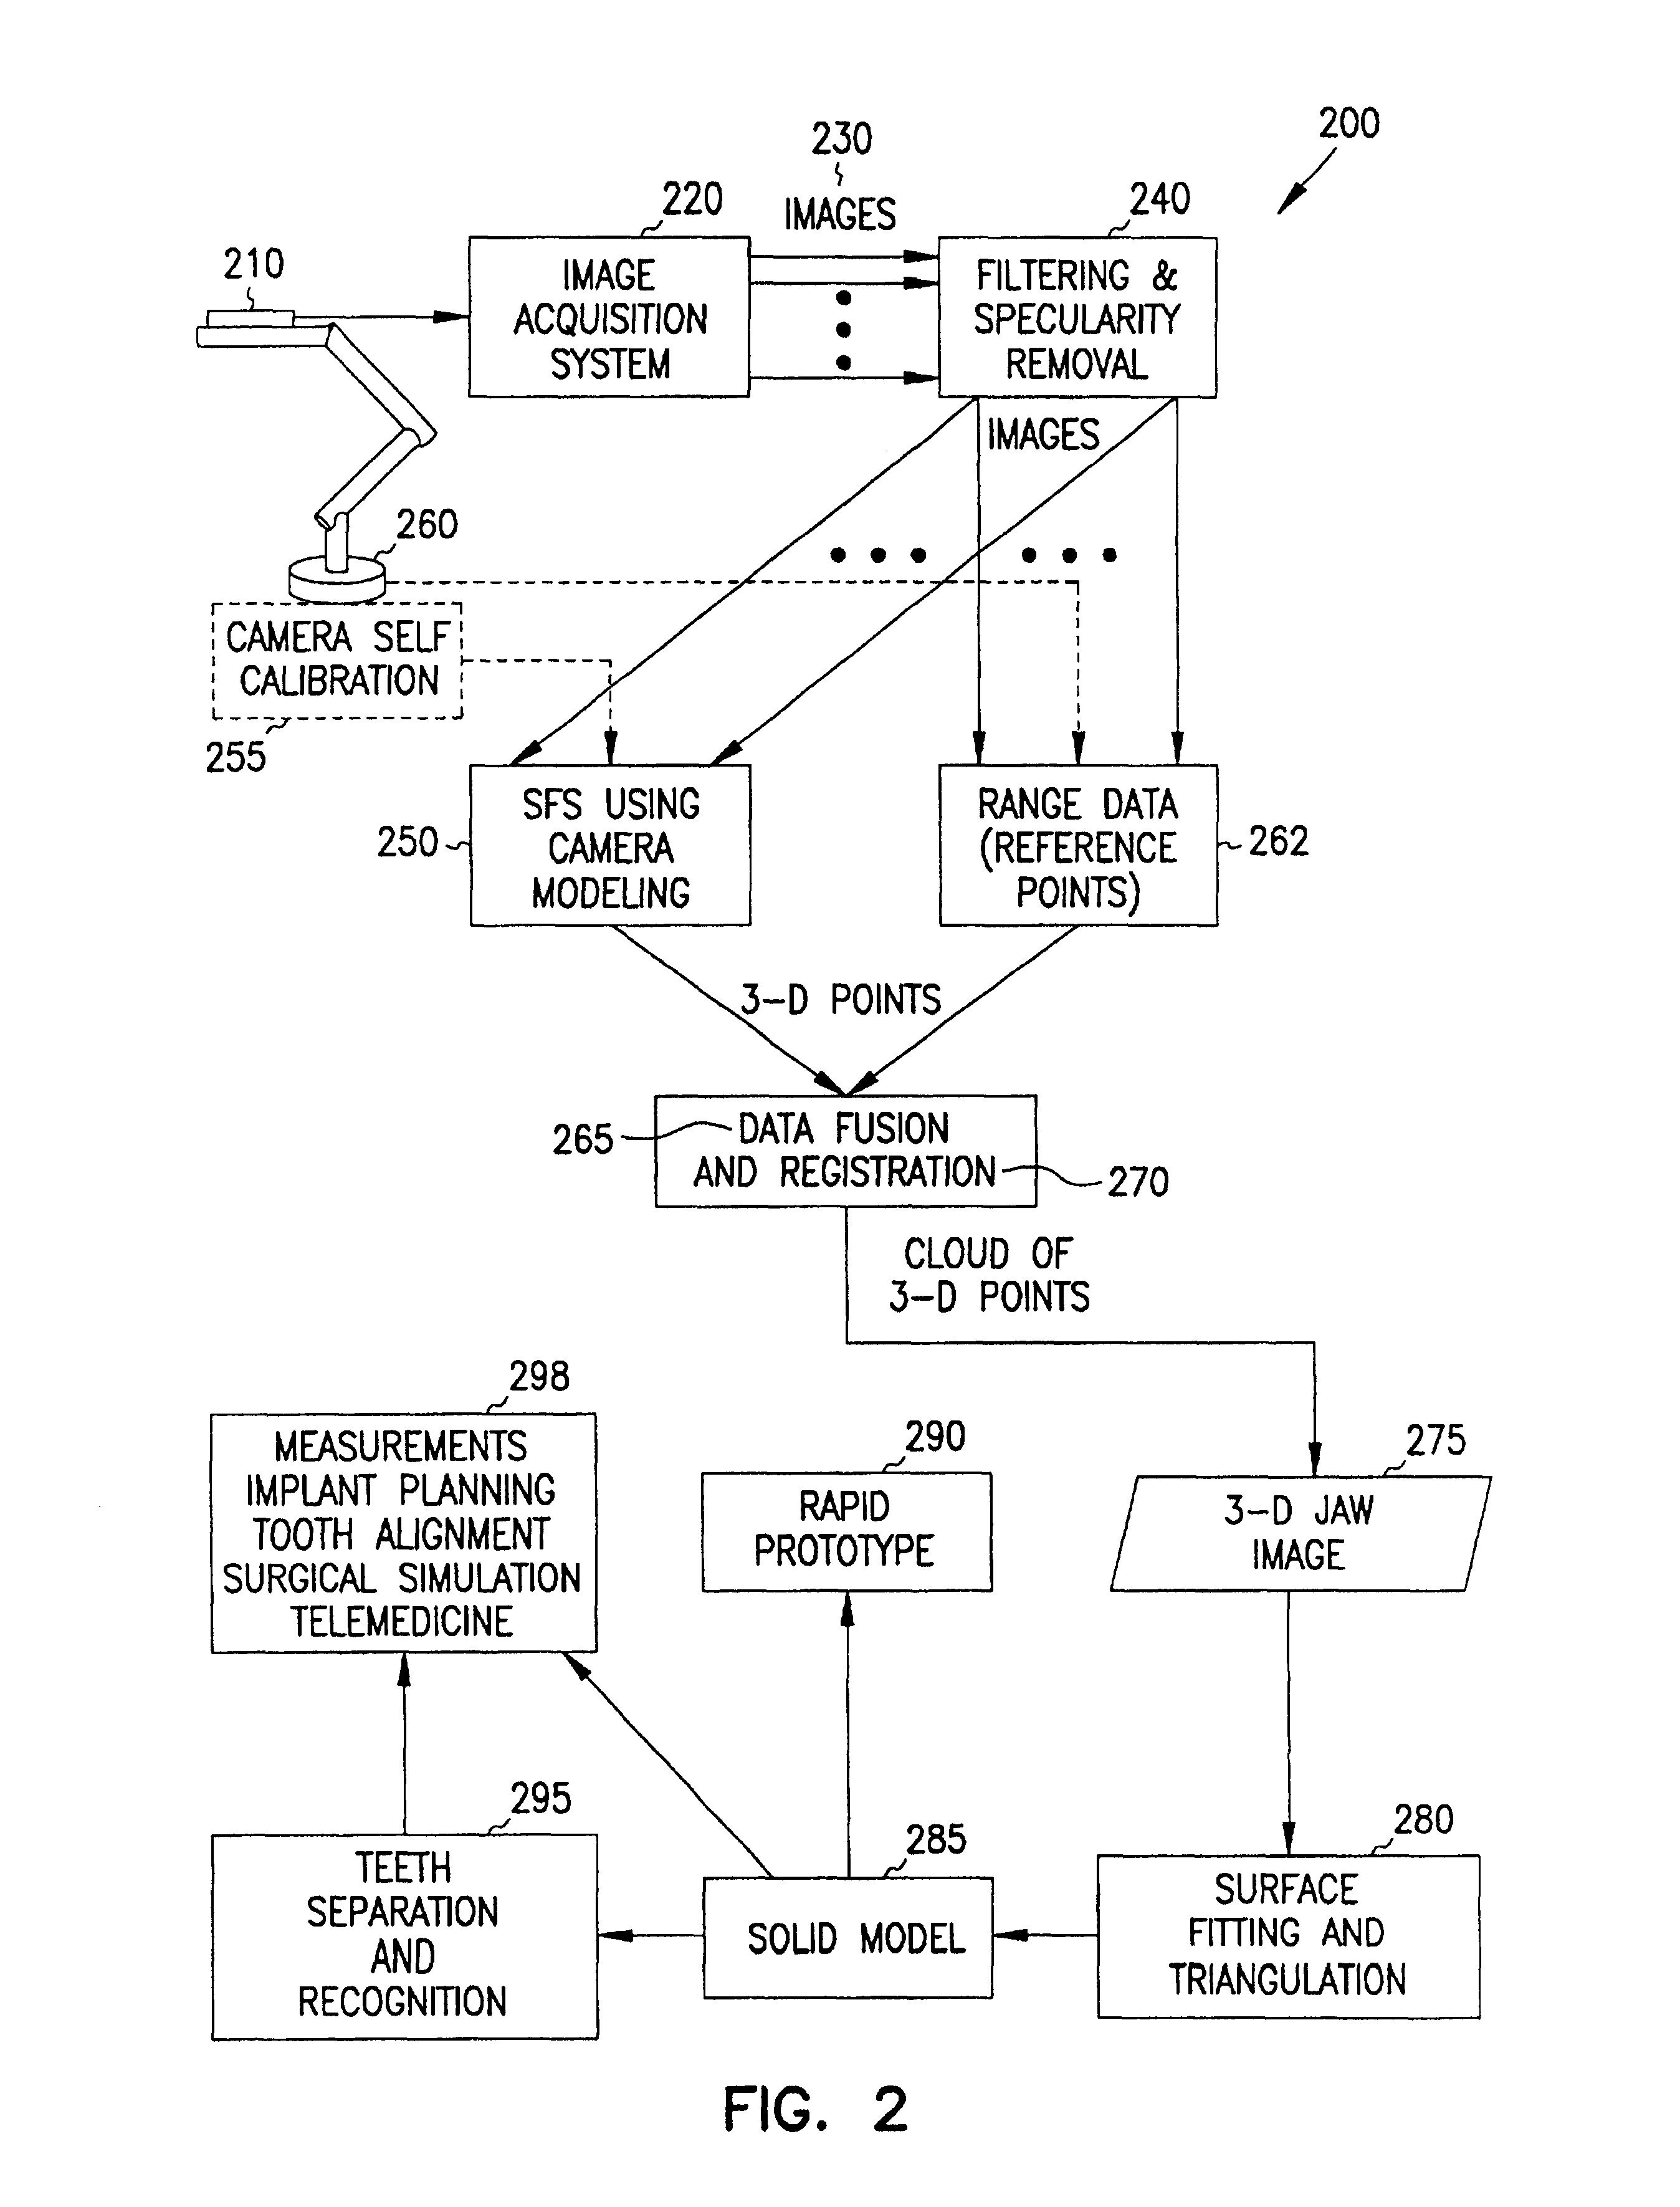 System and method for 3-D digital reconstruction of an oral cavity from a sequence of 2-D images